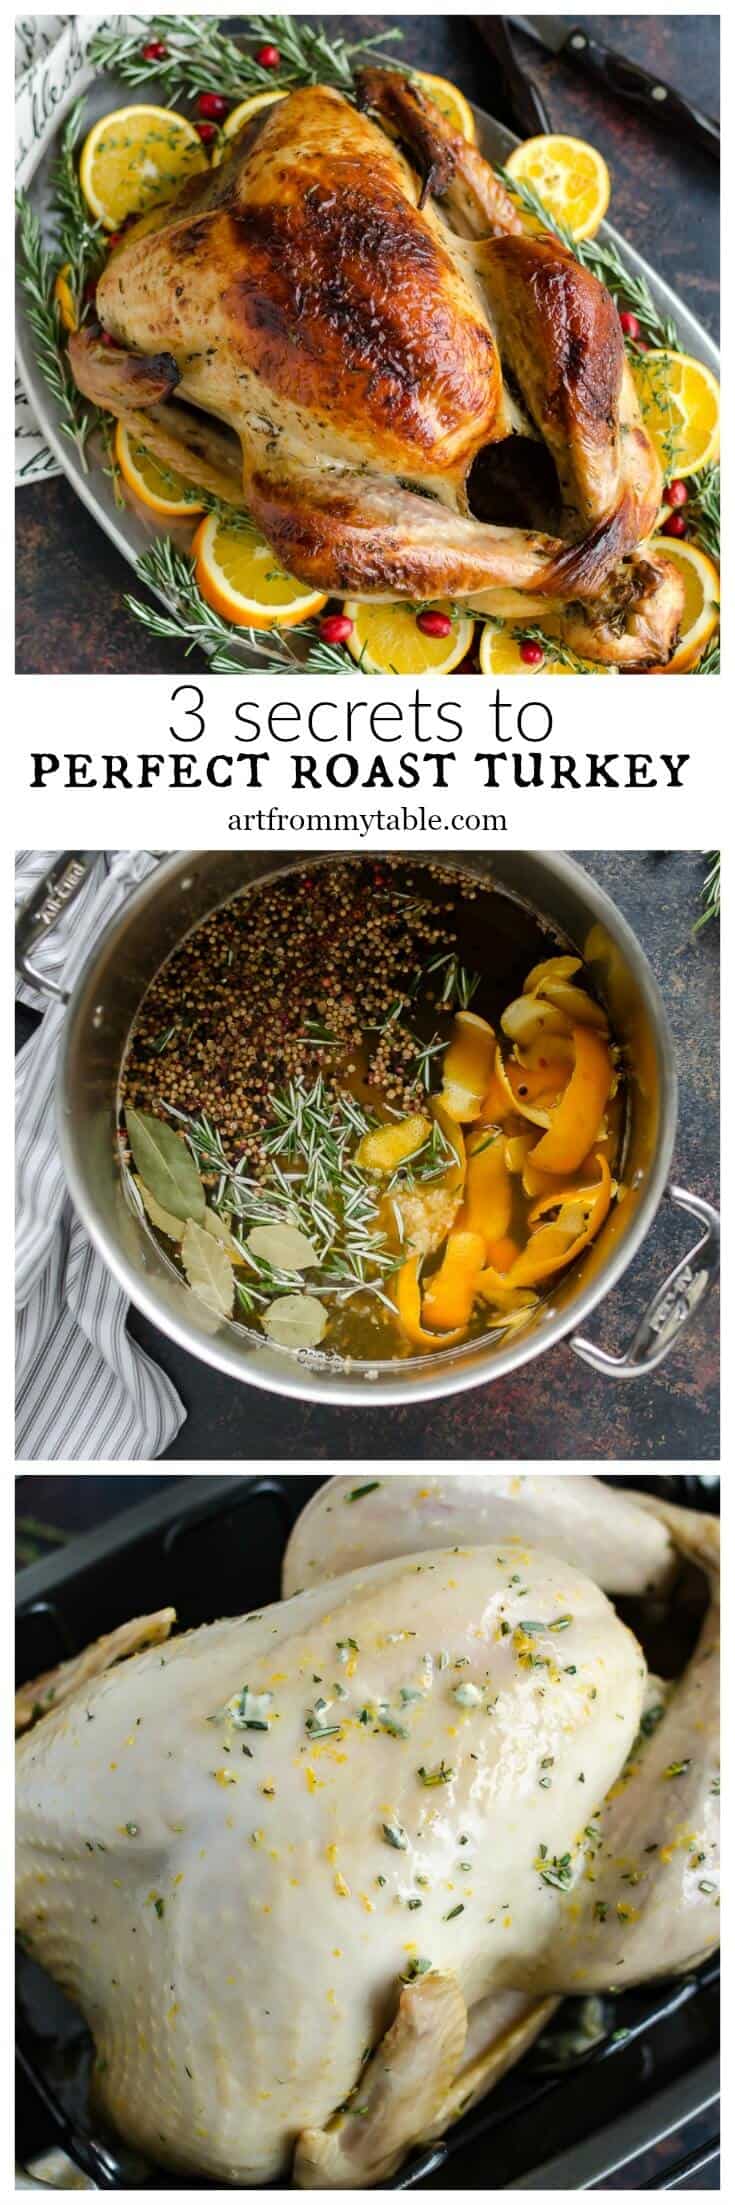 This will be the Best Roast Turkey Recipe you ever eat! Crisp and golden on the outside, infused with citrus butter and herbs, perfectly juicy and moist on the inside. Here I'm sharing my 3 secrets to perfect roast turkey every time. via @artfrommytable